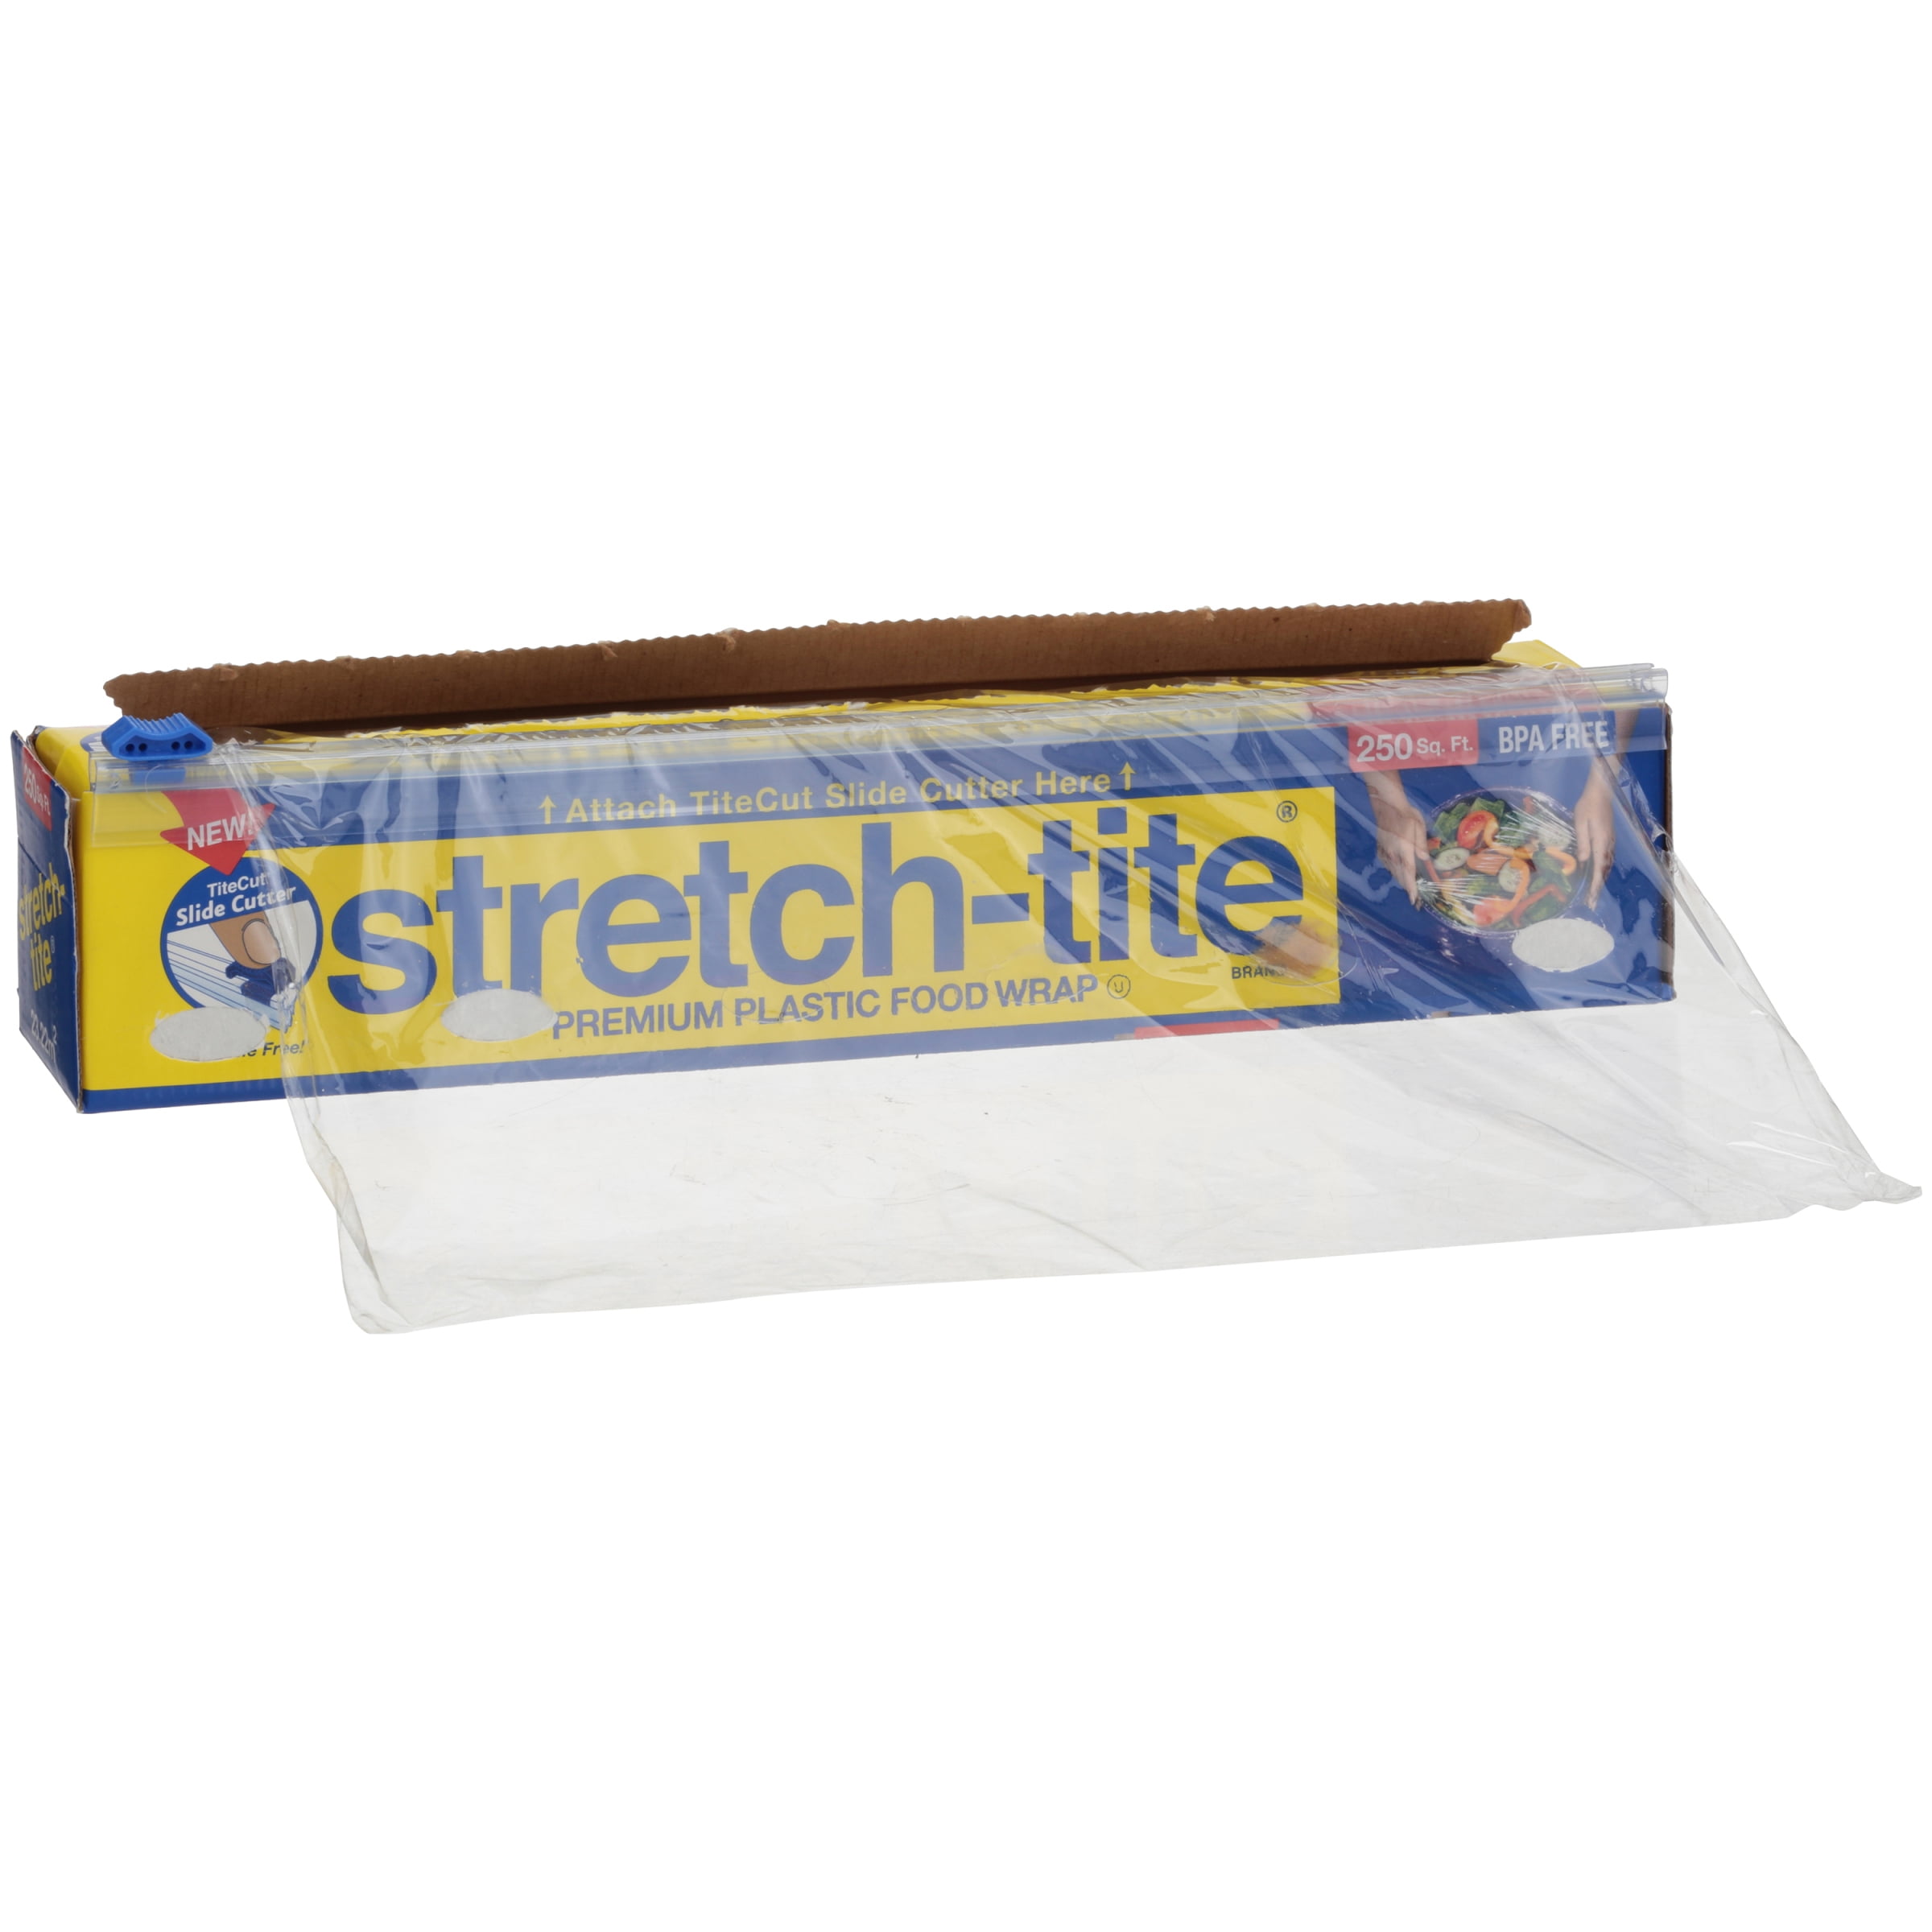 We're proud to announce Stretch-Tite Premium Food Wrap and Freeze-Tite  Premium Freezer Wrap are now available at all Giant Eagle locations!, By Stretch-Tite Premium Food Wrap